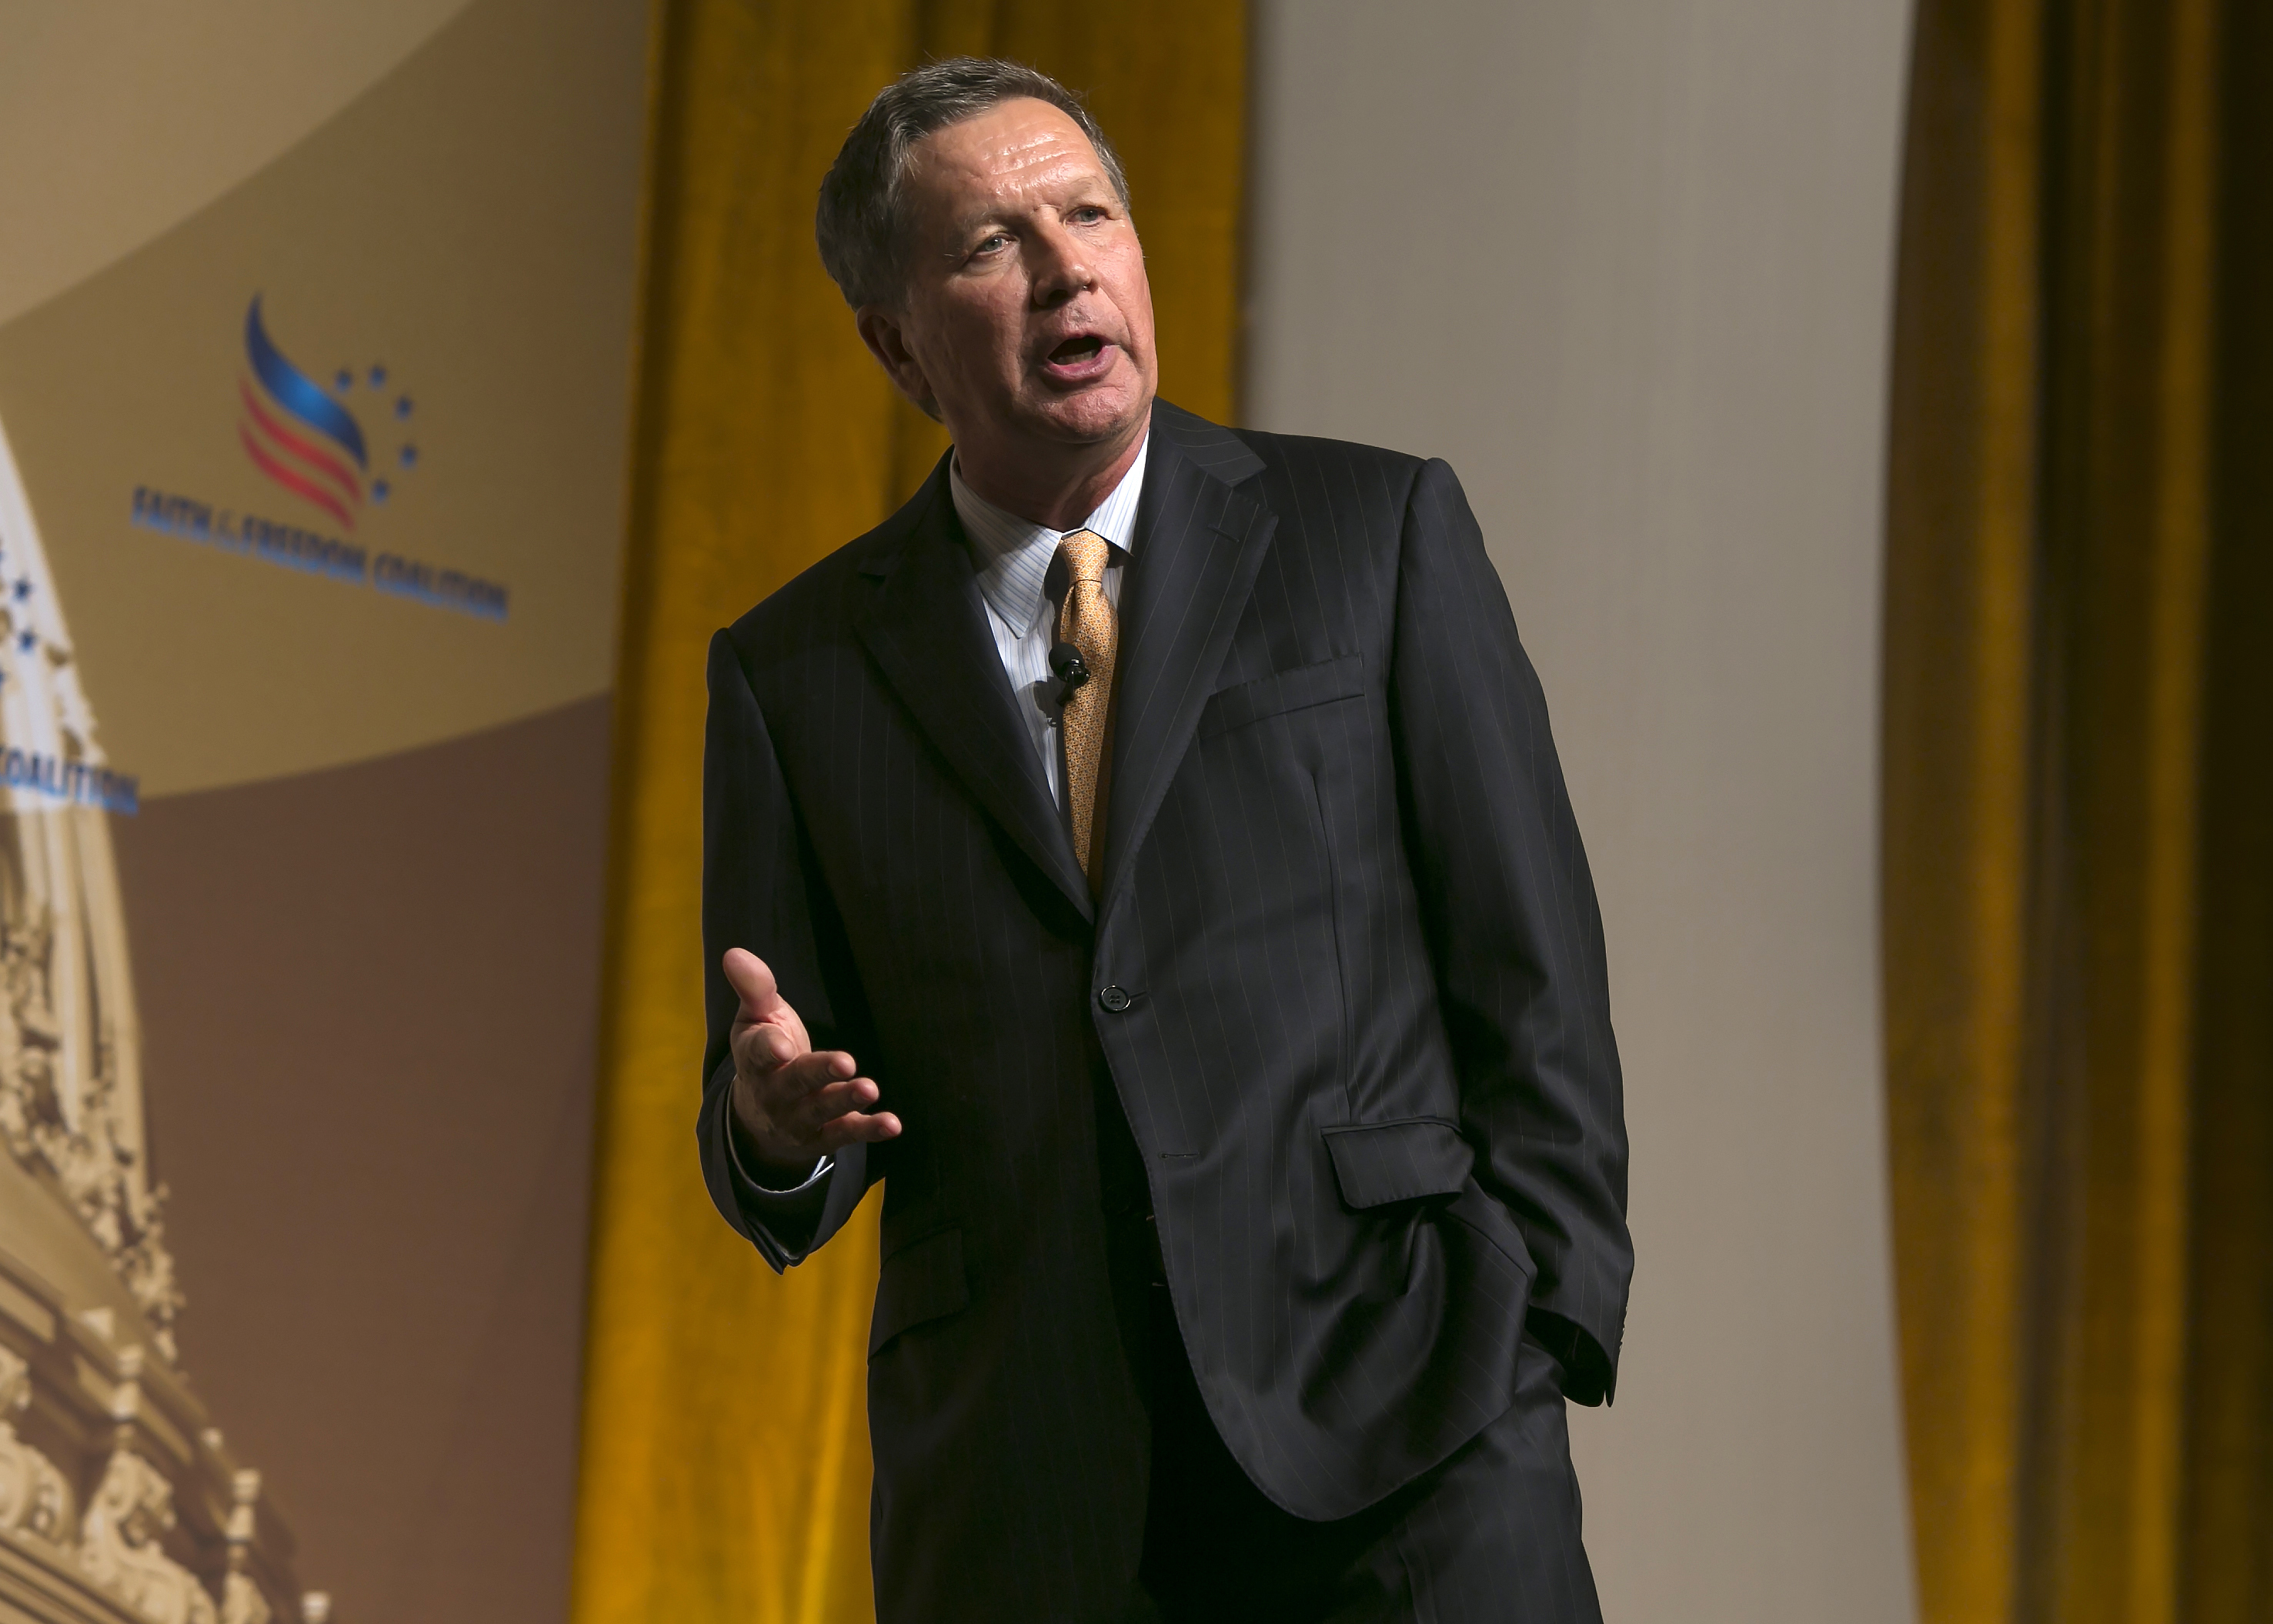 Republican presidential candidate and Ohio Gov. John Kasich speaks during the Faith & Freedom Coalitions Road to Majority conference at the Washington D.C. Omni Shoreham Hotel on June 19, 2015. (Al Drago—CQ Roll Call/Getty Images)